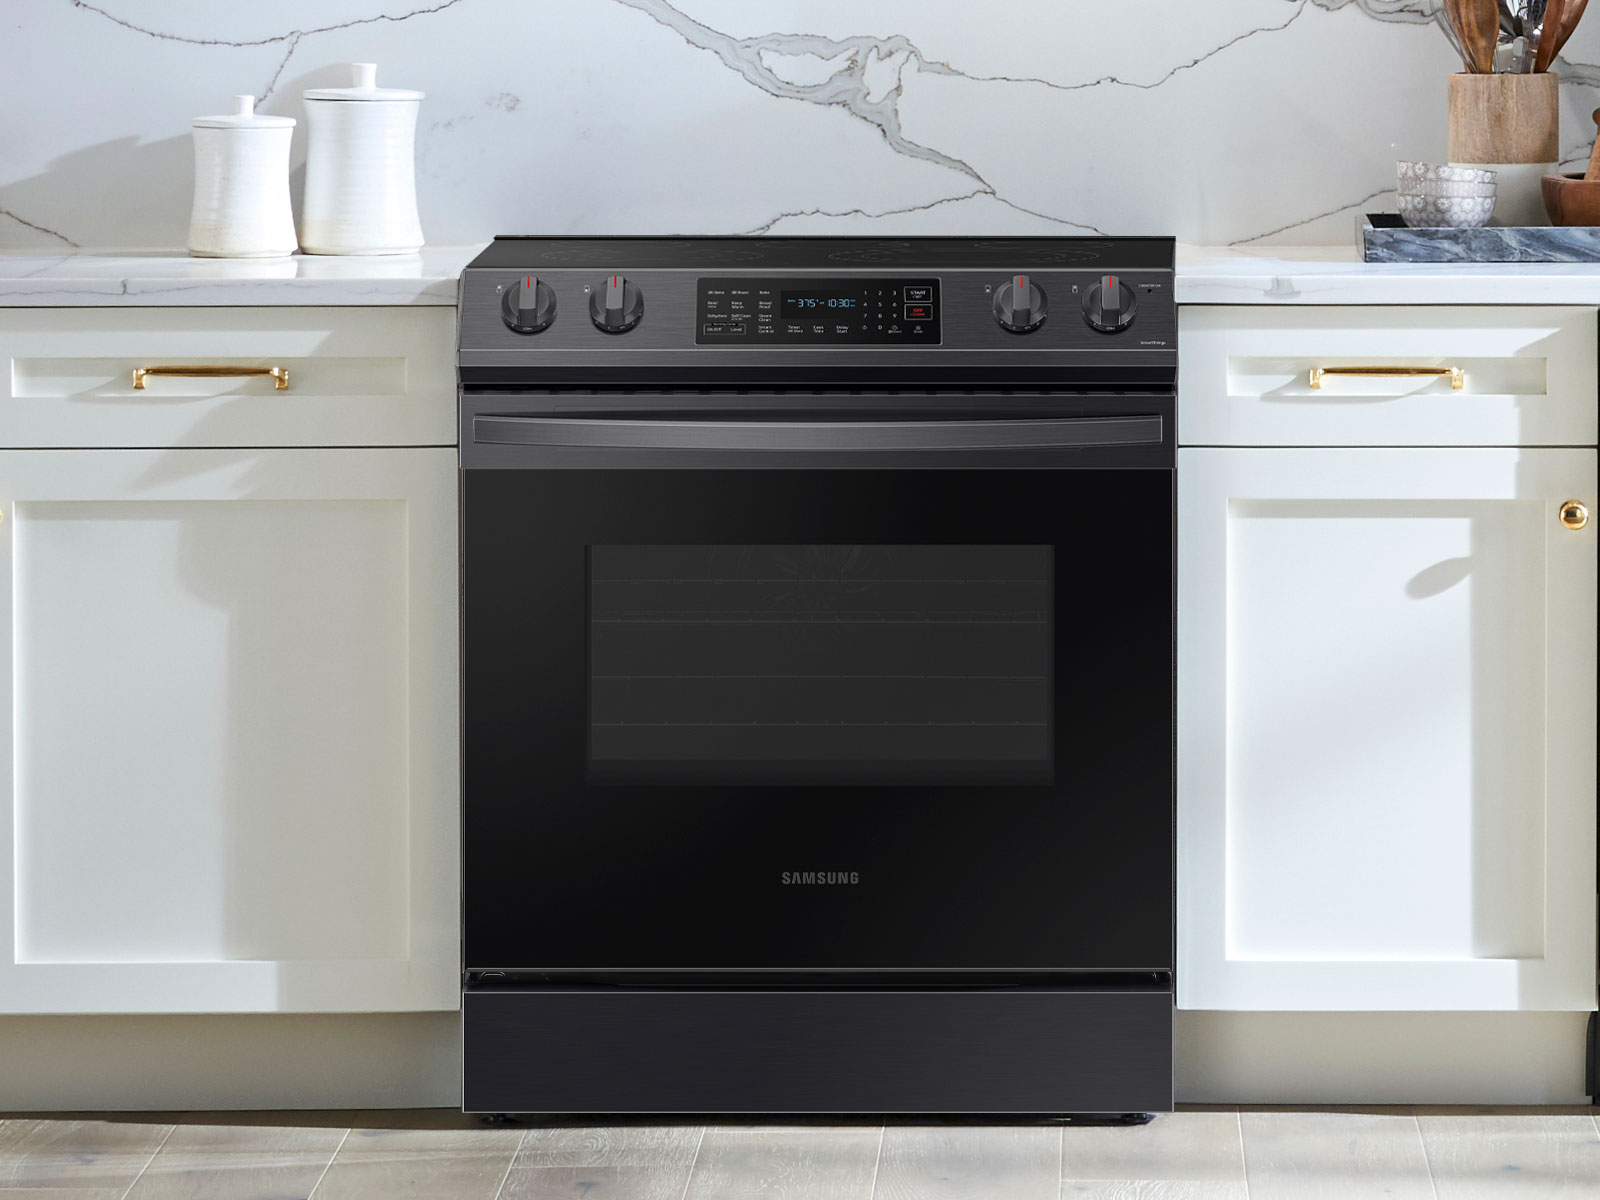 Samsung 6.3 Cu. ft. Slide-in Electric Range with Convection, Stainless Steel - NE63T8311SS